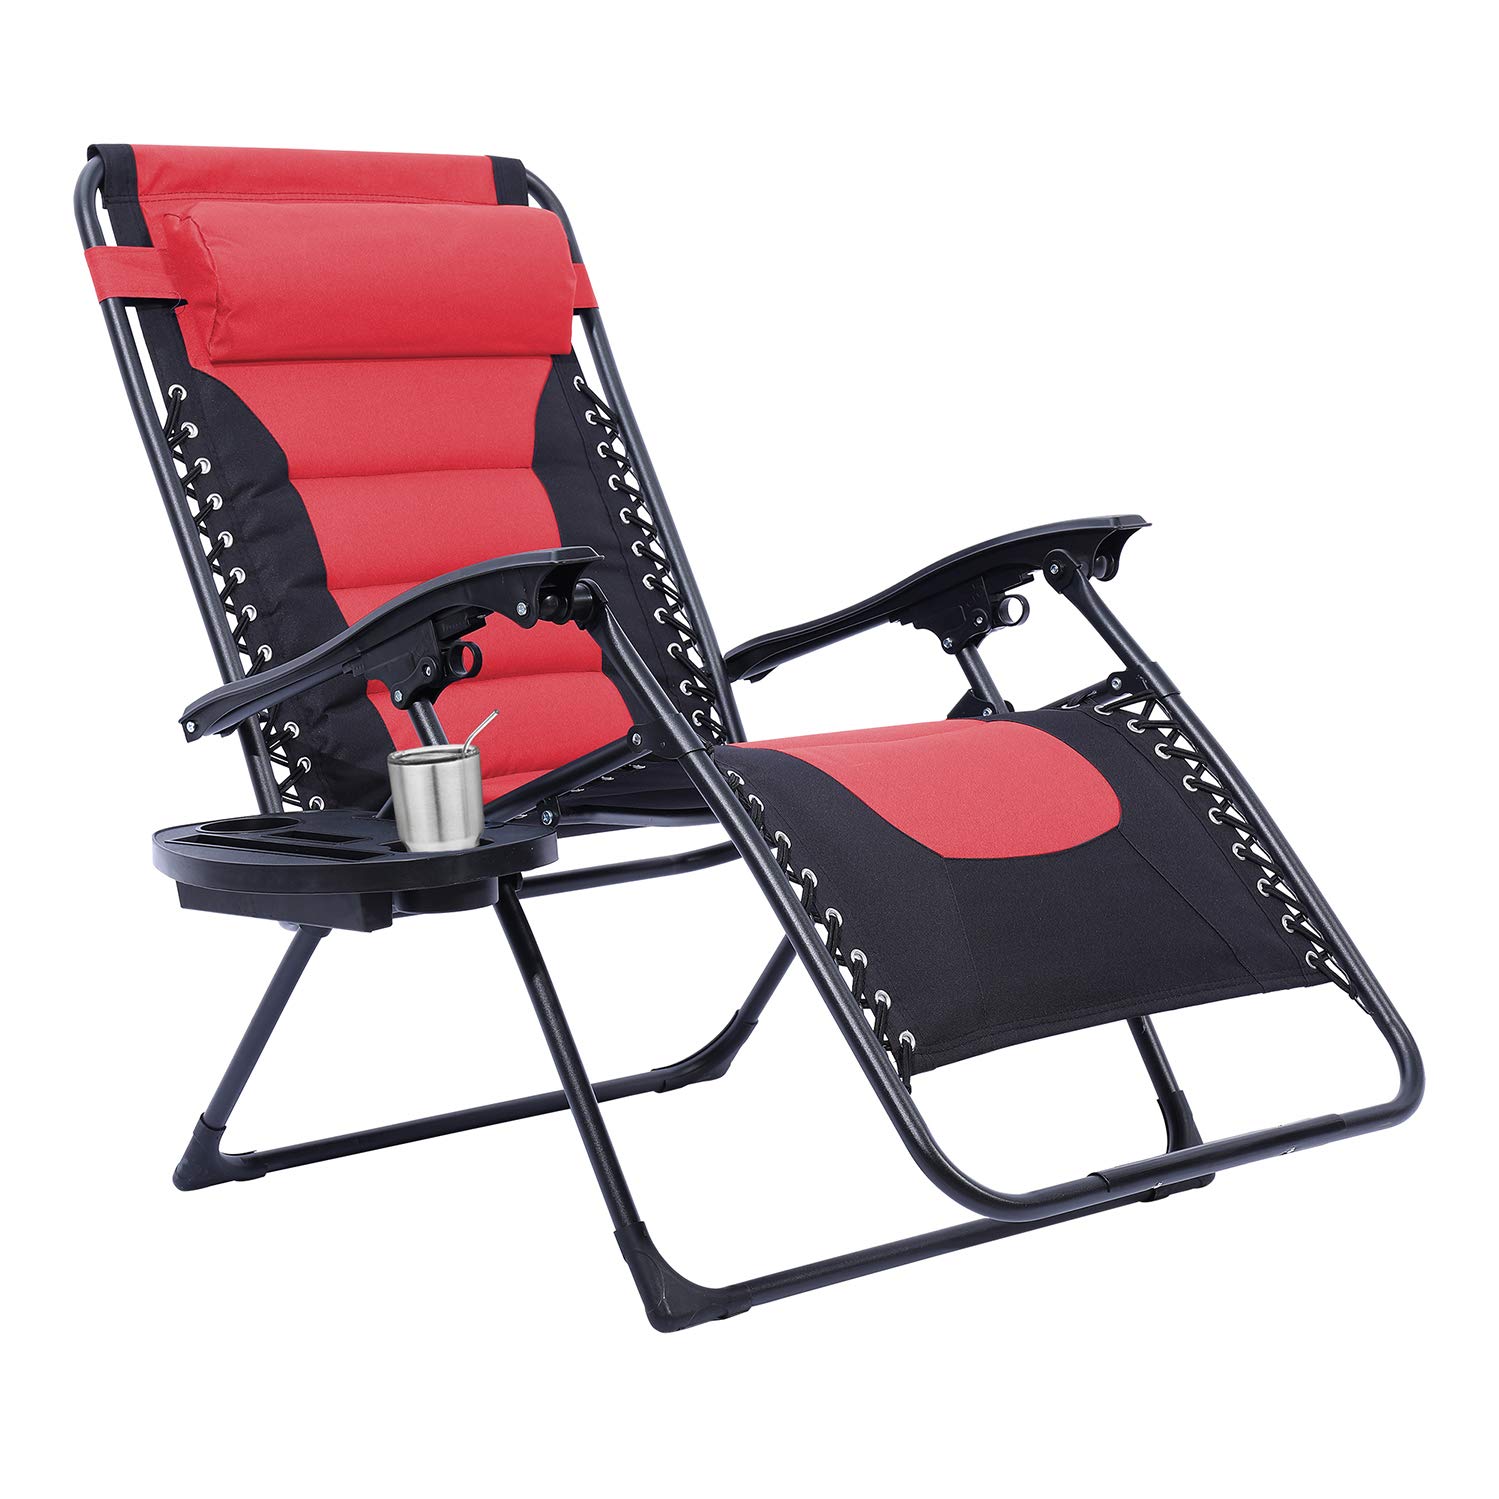 Yard and Camping LAJOSON Lounge Chairs Folding Bed Adjustable Recliner Patio Chairs Folding Recliner with Pillow for Poolside